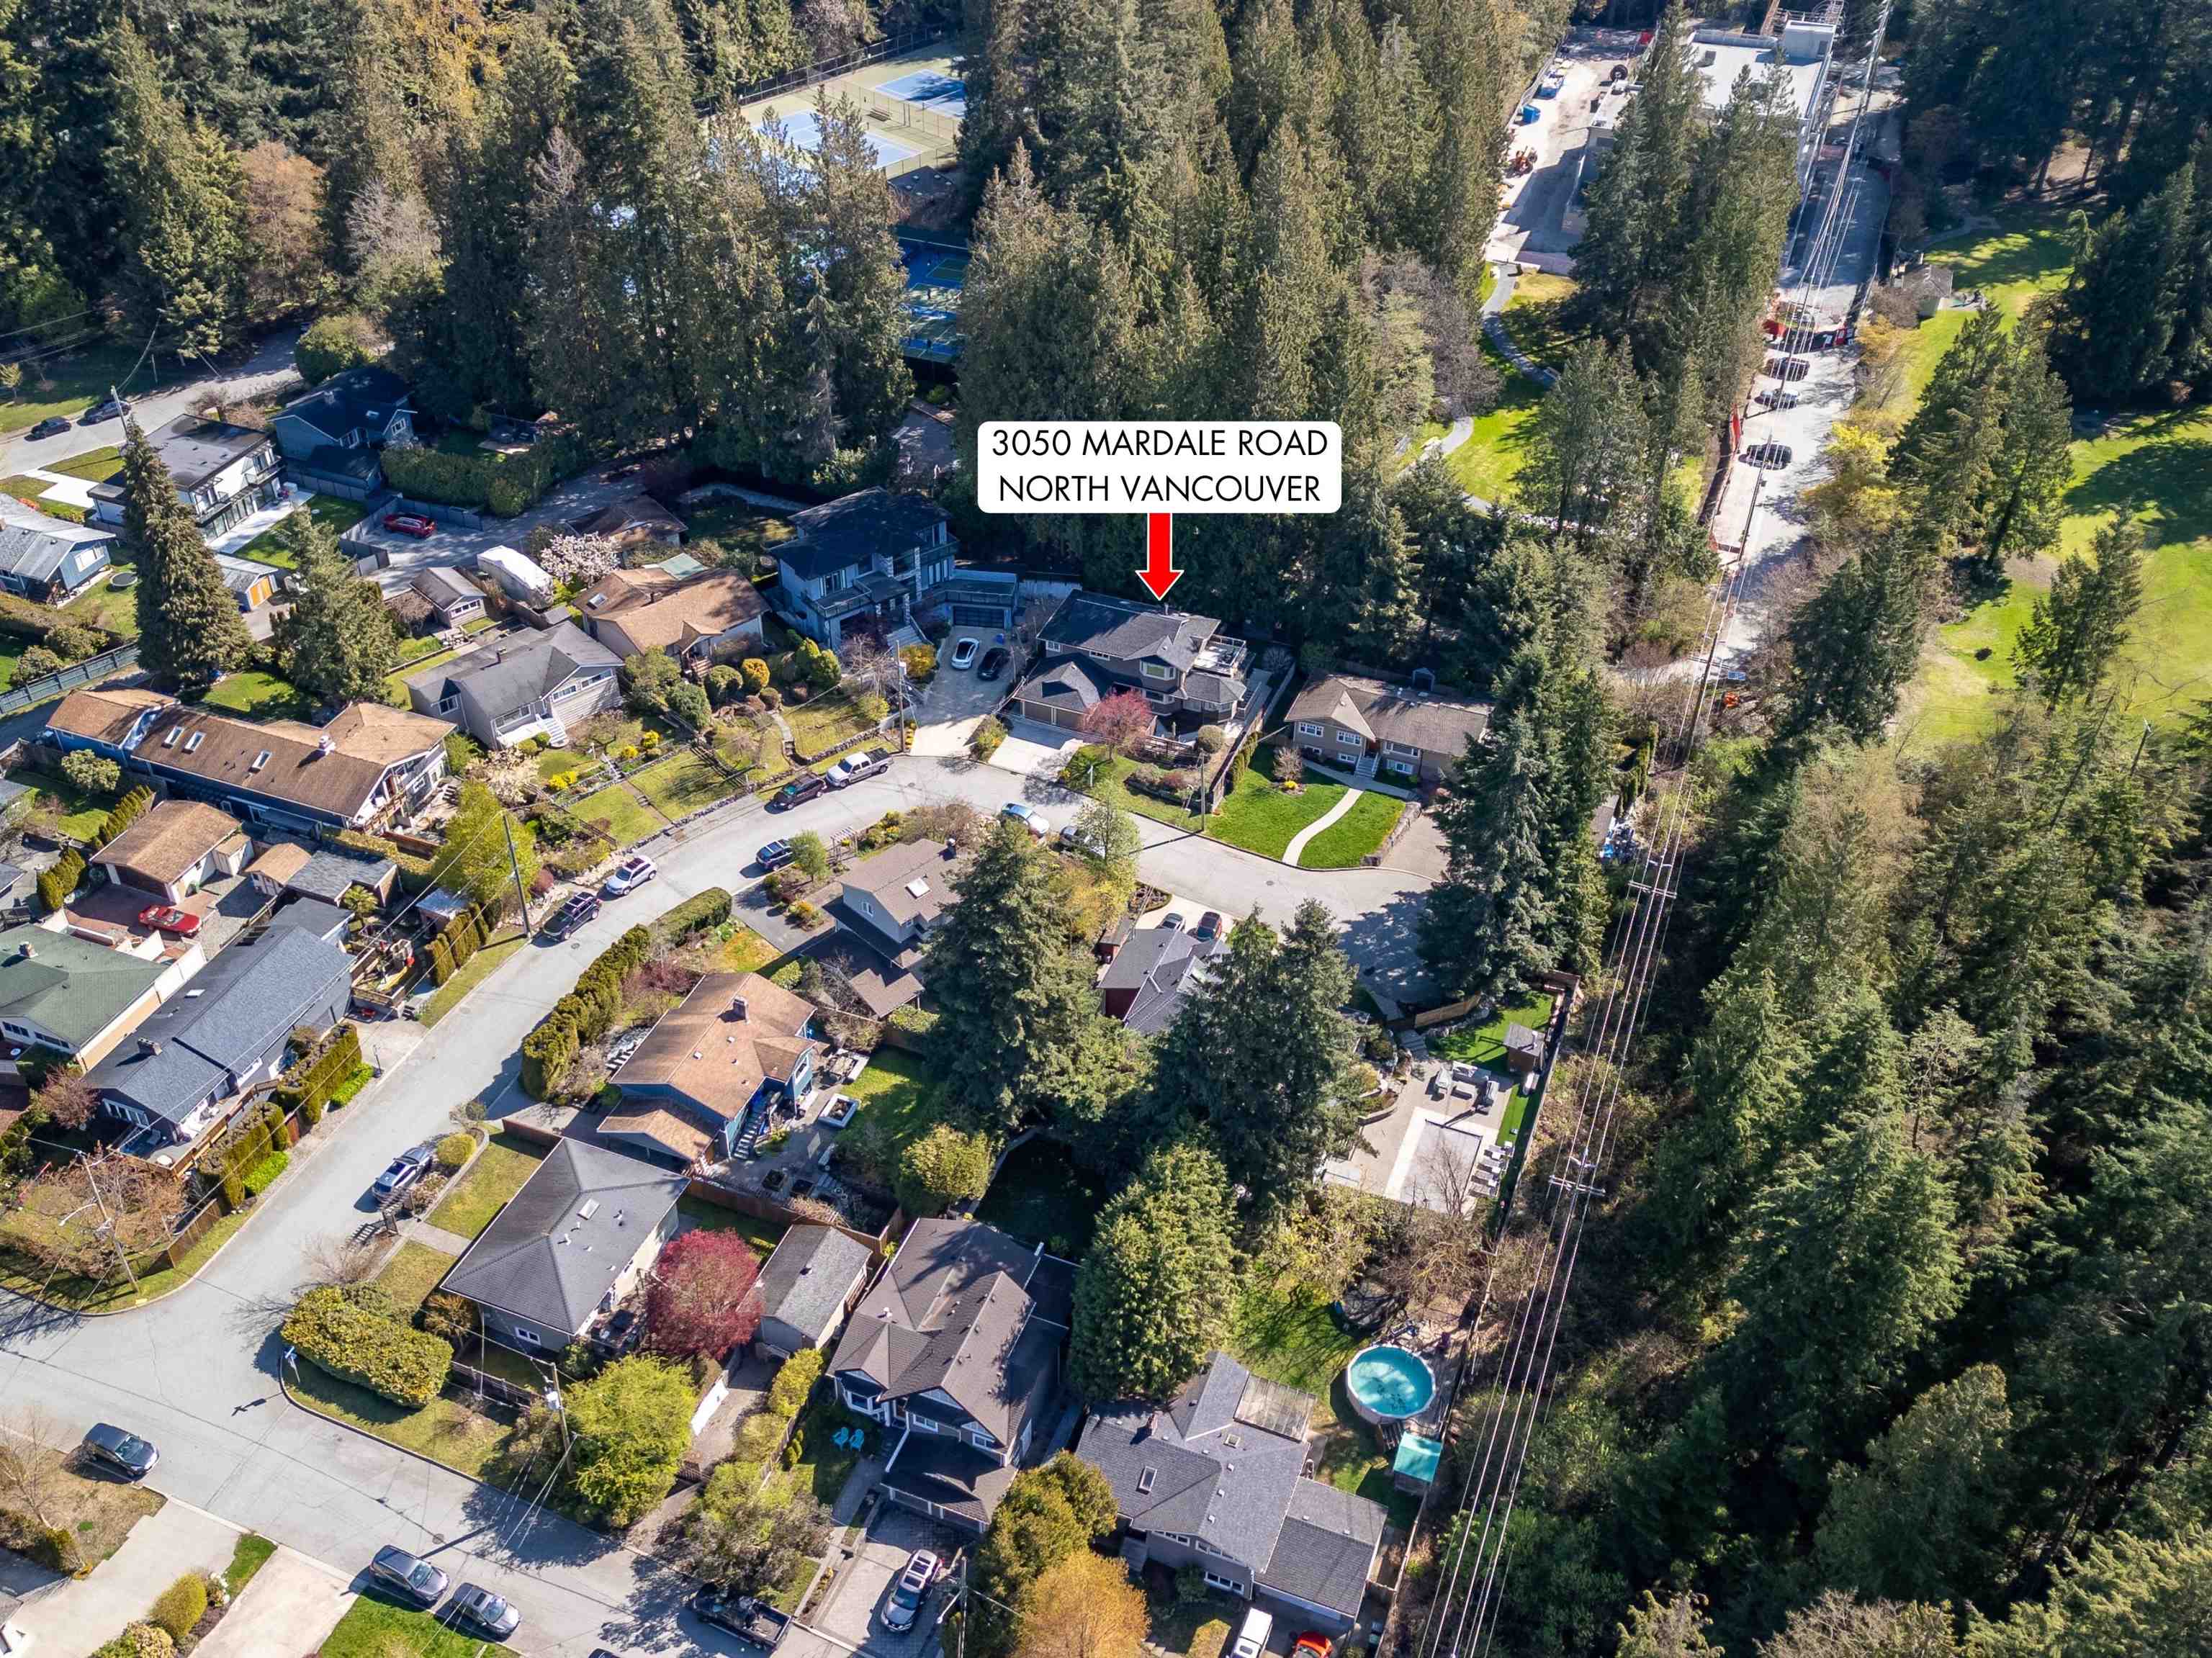 Listing image of 3050 MARDALE ROAD